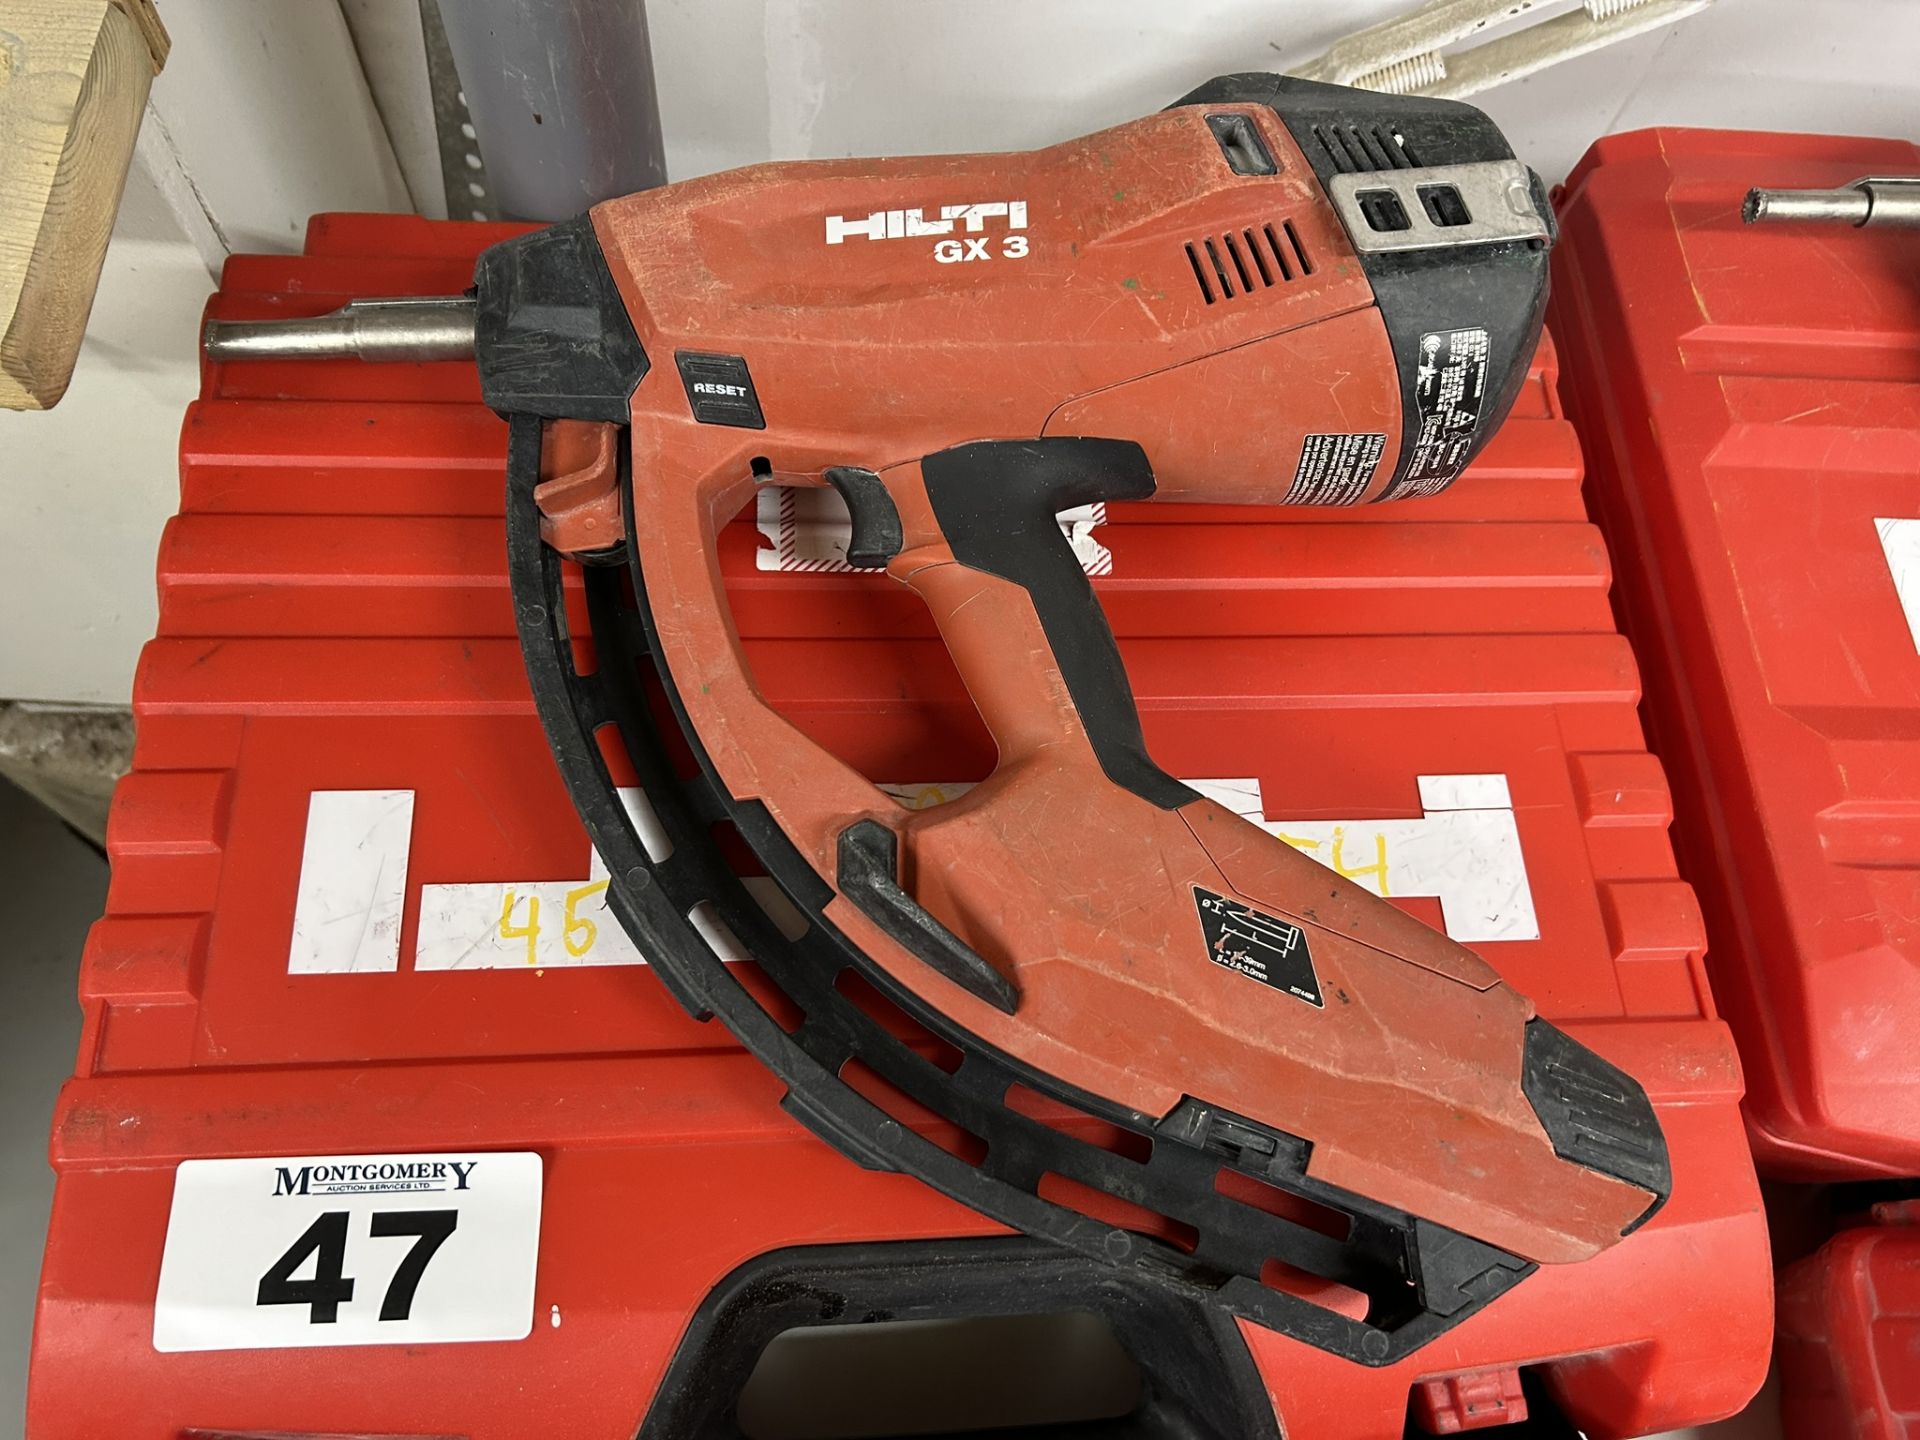 HILTI GX 3 GAS-ACTUATED FASTENING TOOL GAS NAILER WITH SINGLE POWER SOURCE FOR DRYWALL TRACK,